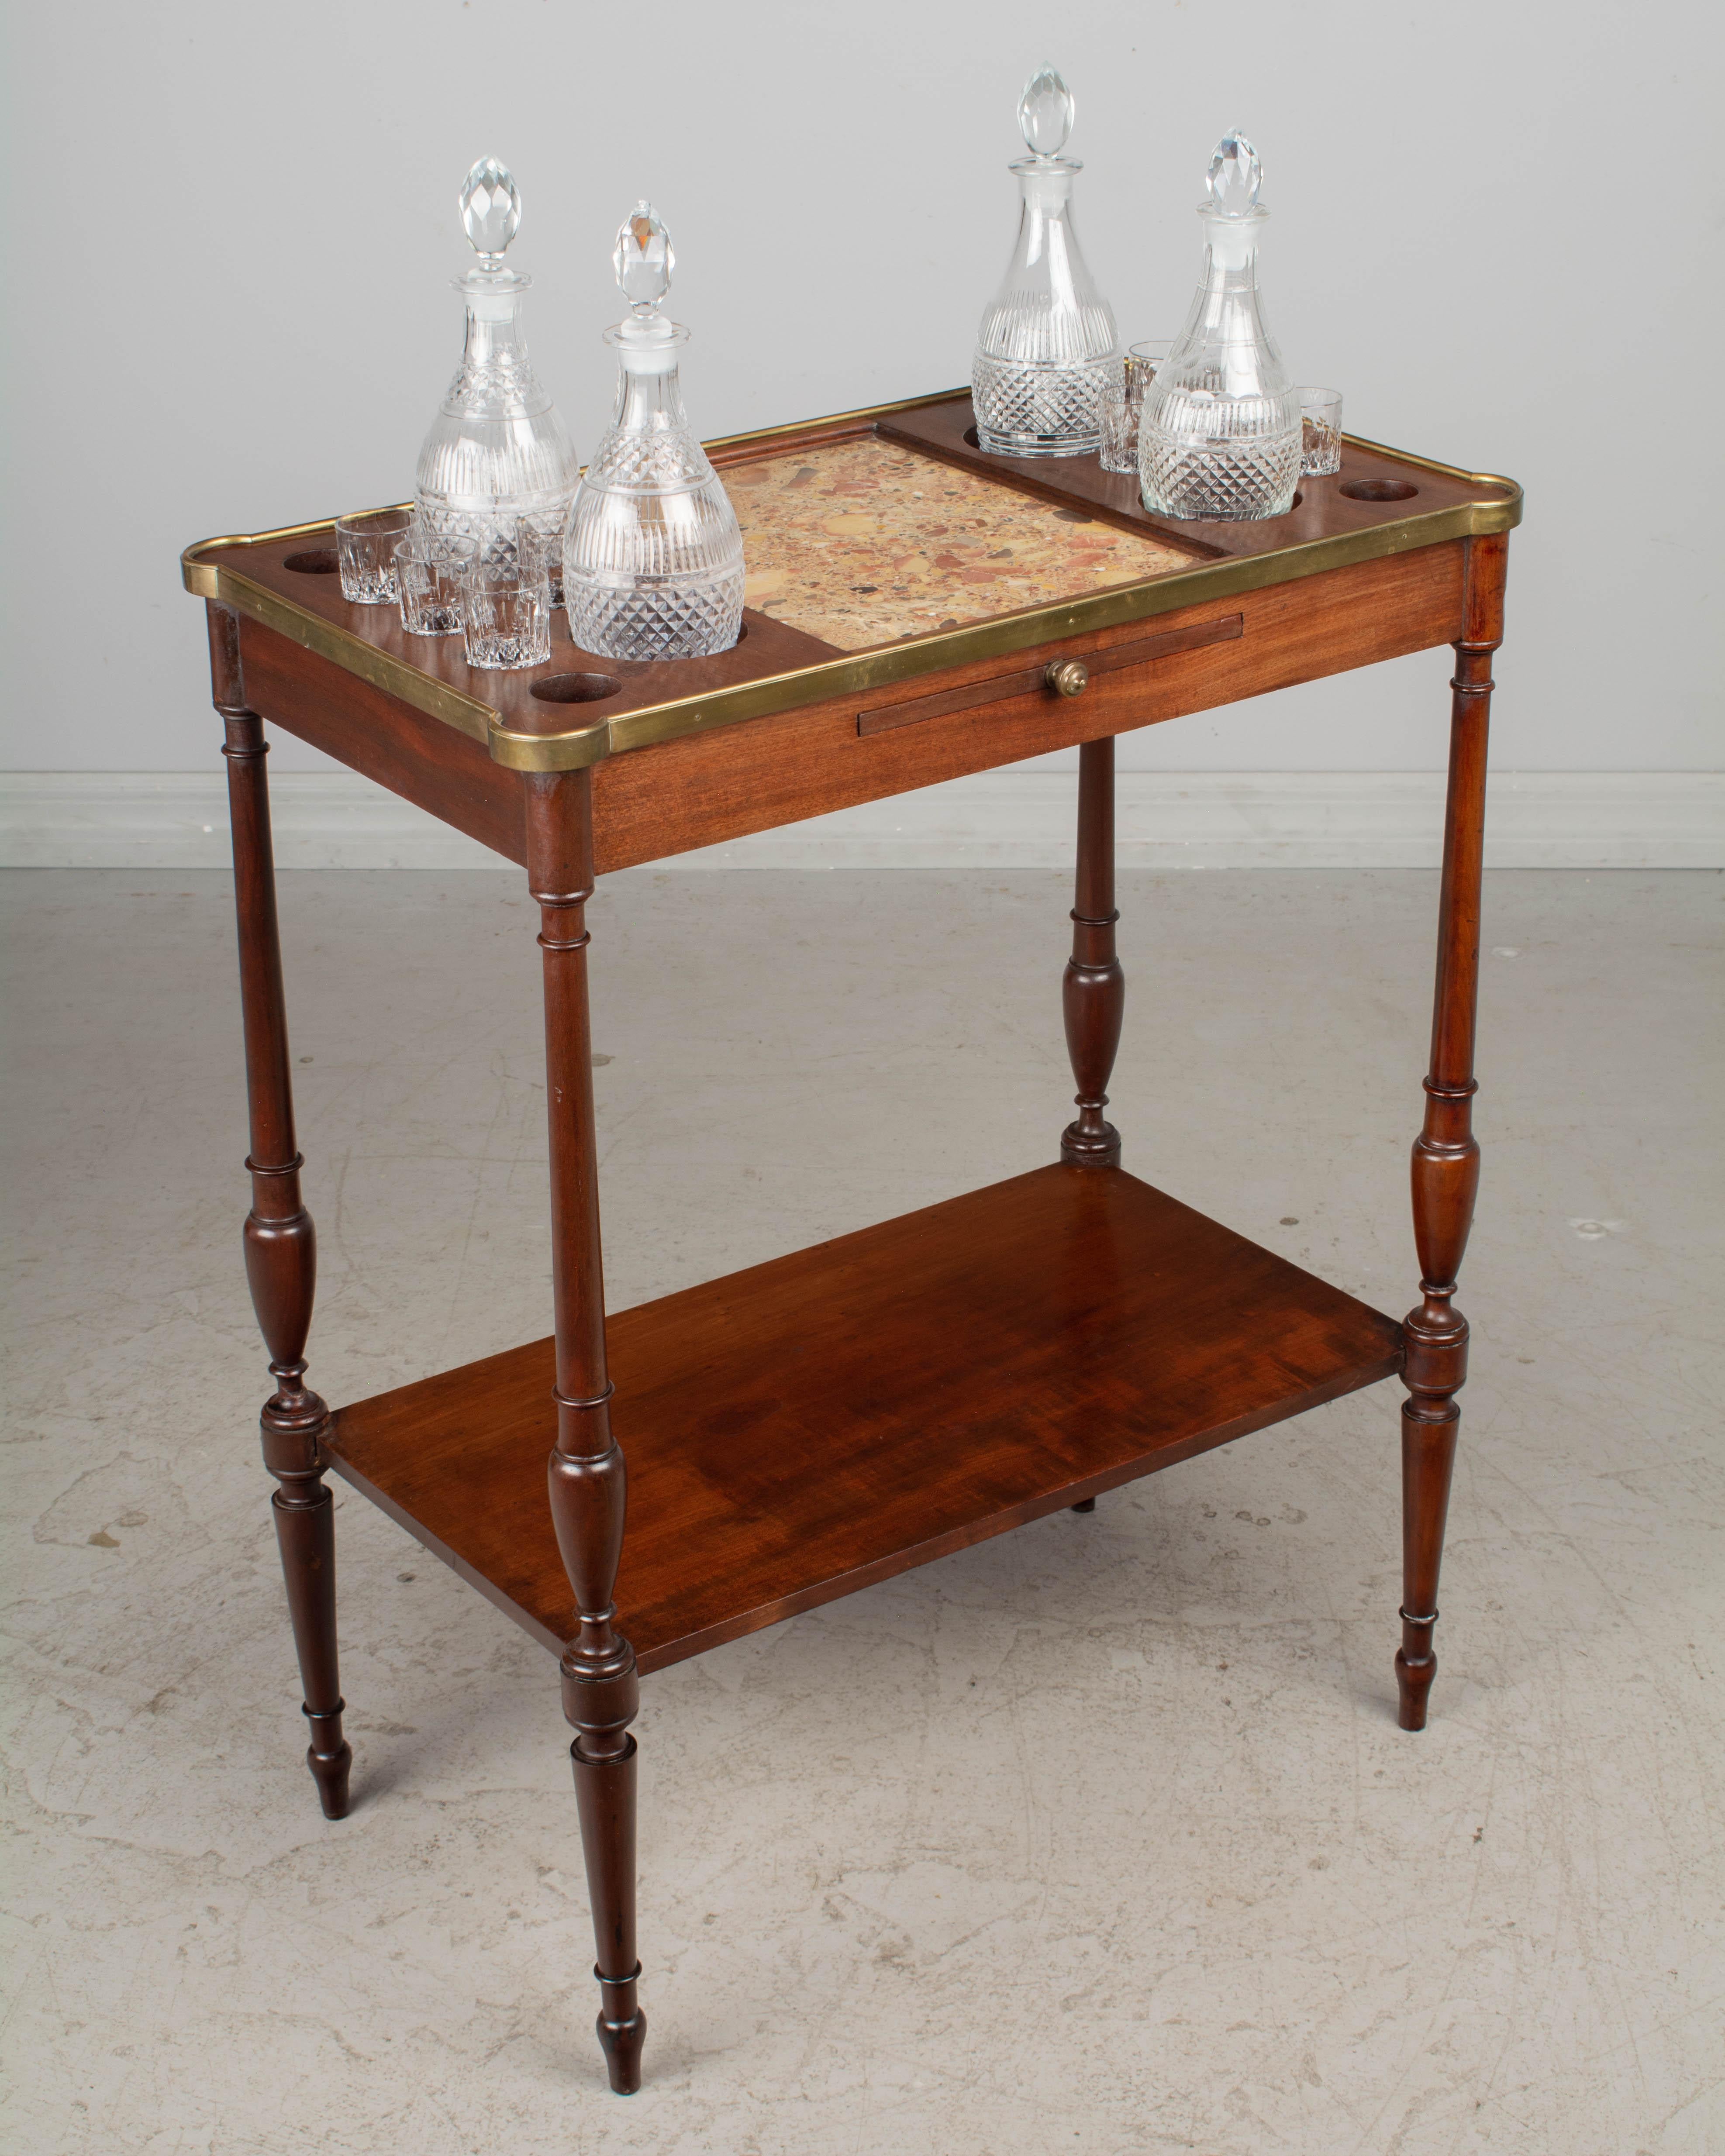 A French Louis XVI style liquor side table, or small bar, made of solid mahogany with lower shelf, turned tapered legs and a pull out board for serving. The top has a brass surround, a Breche d'Alep marble inset and wells to hold bottles and